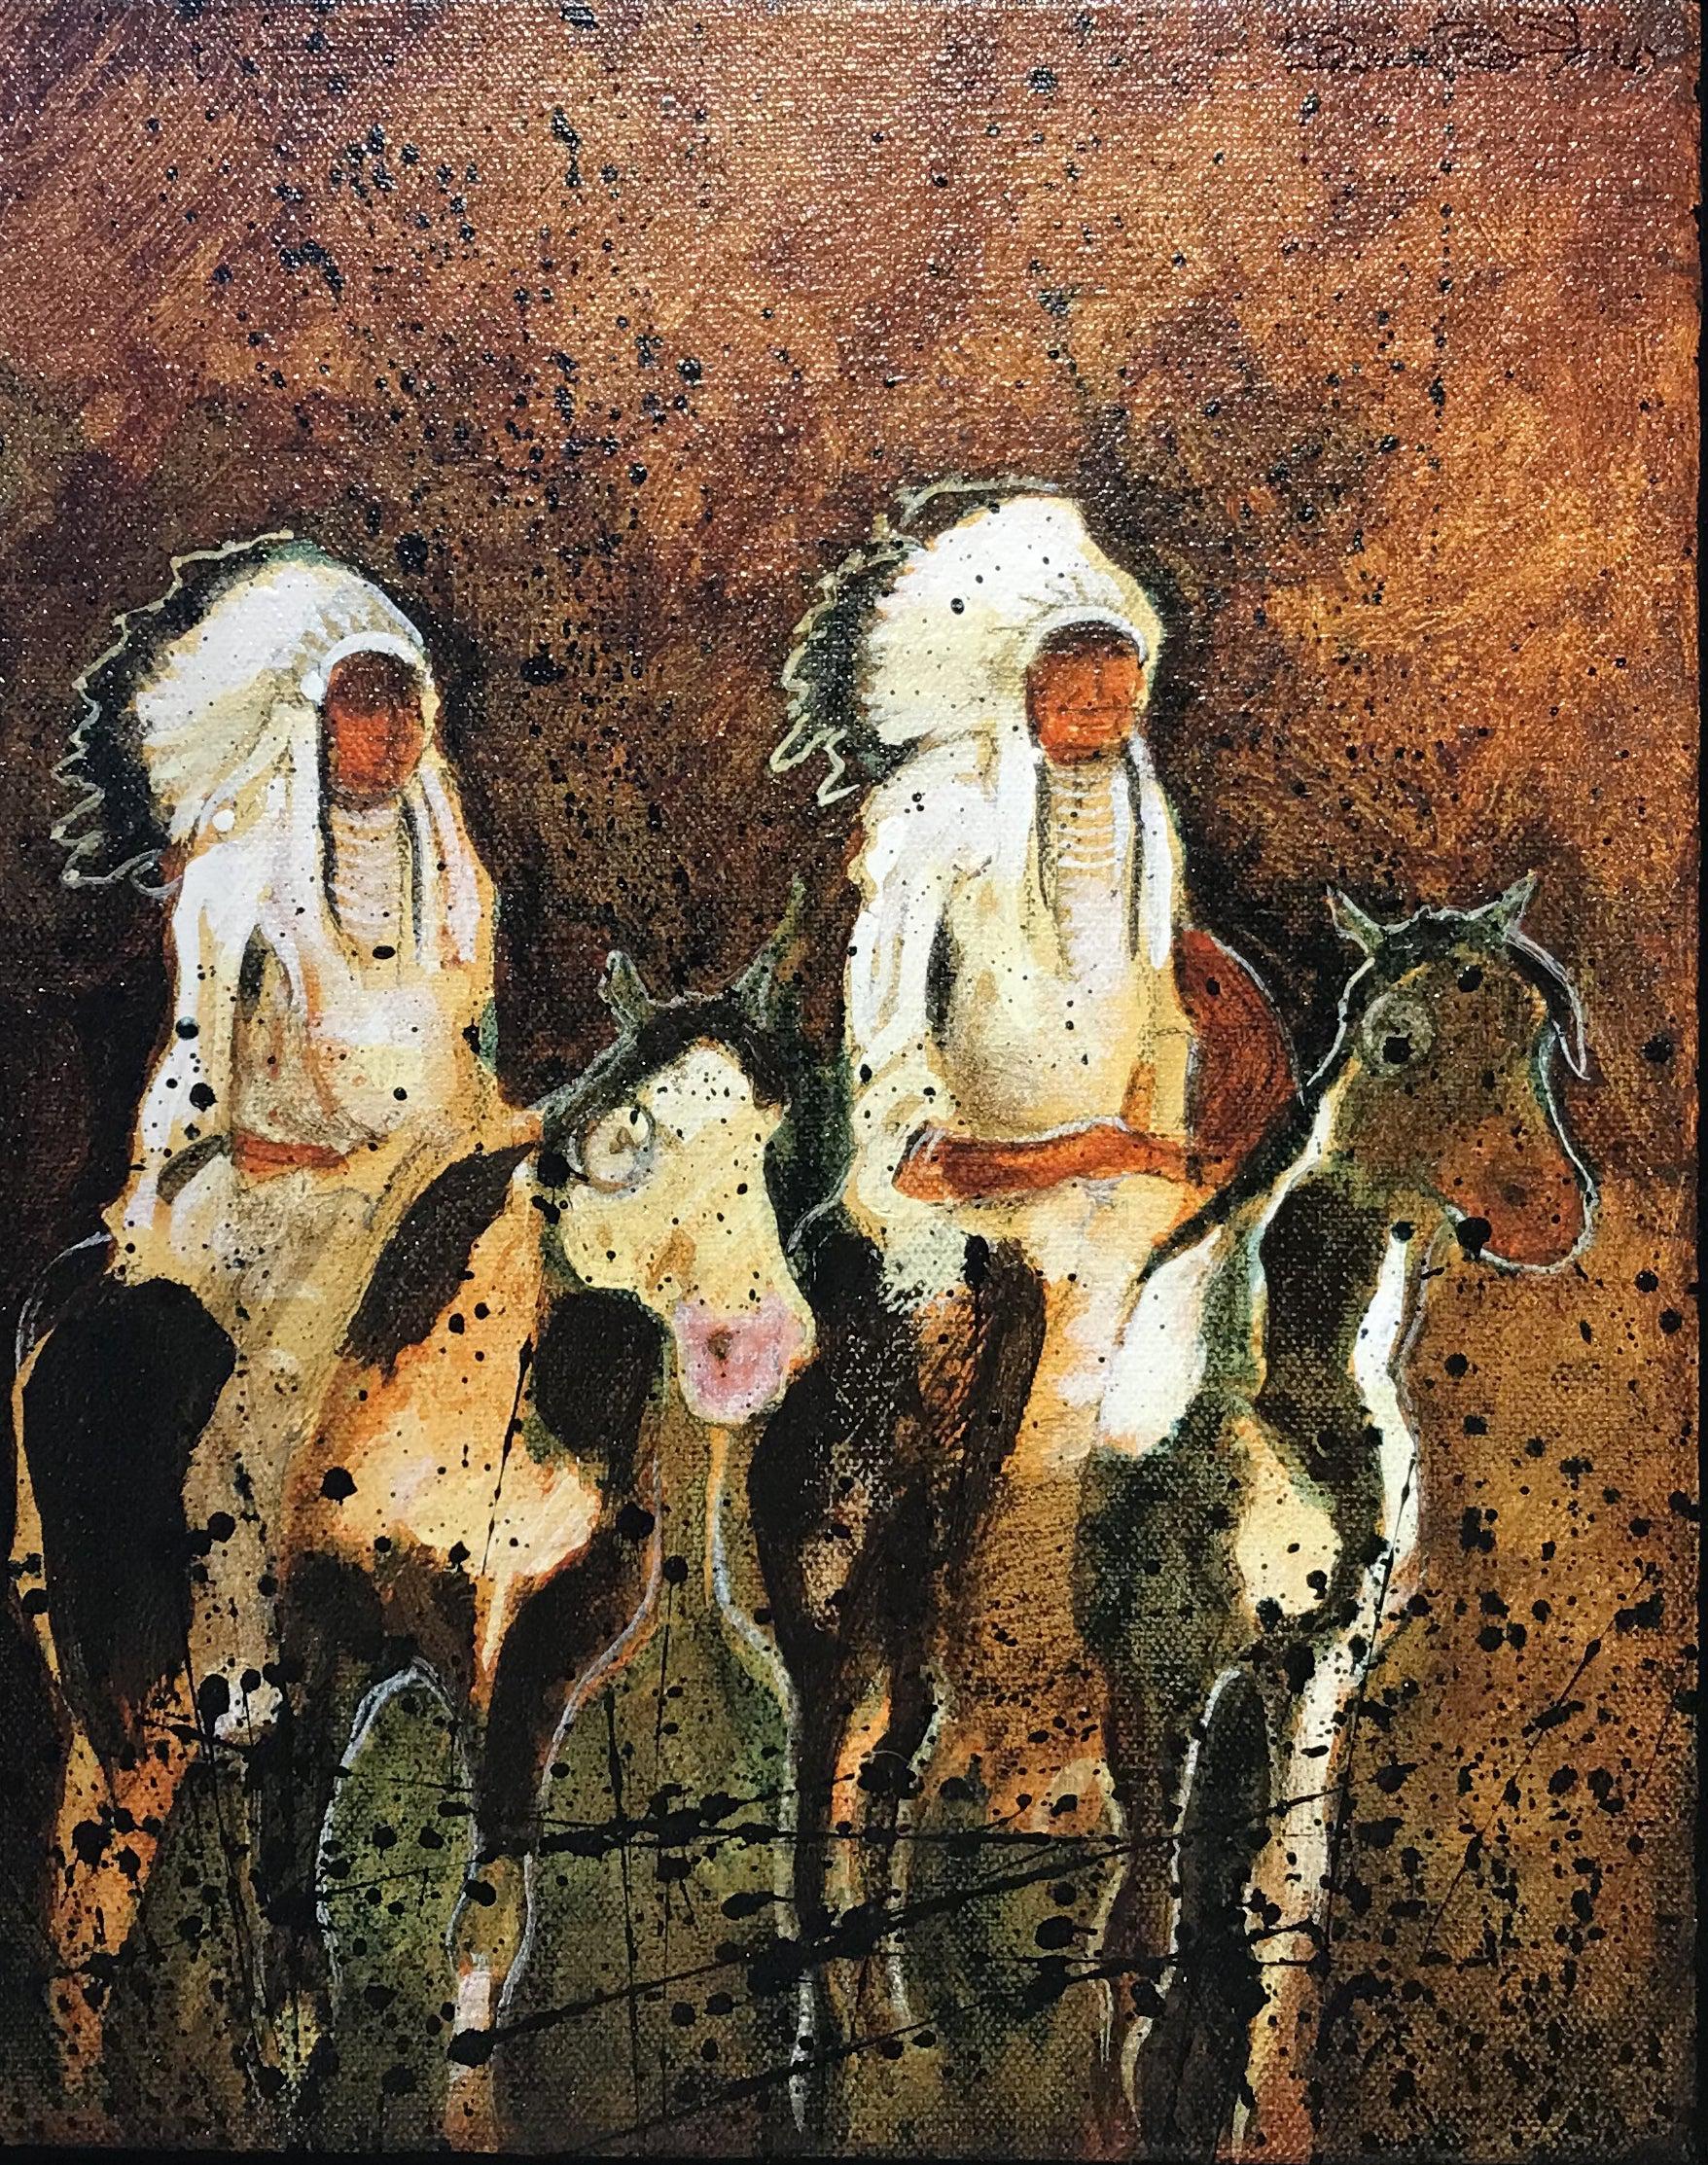 Two Indian Riders-Painting-Kevin Red Star-Sorrel Sky Gallery